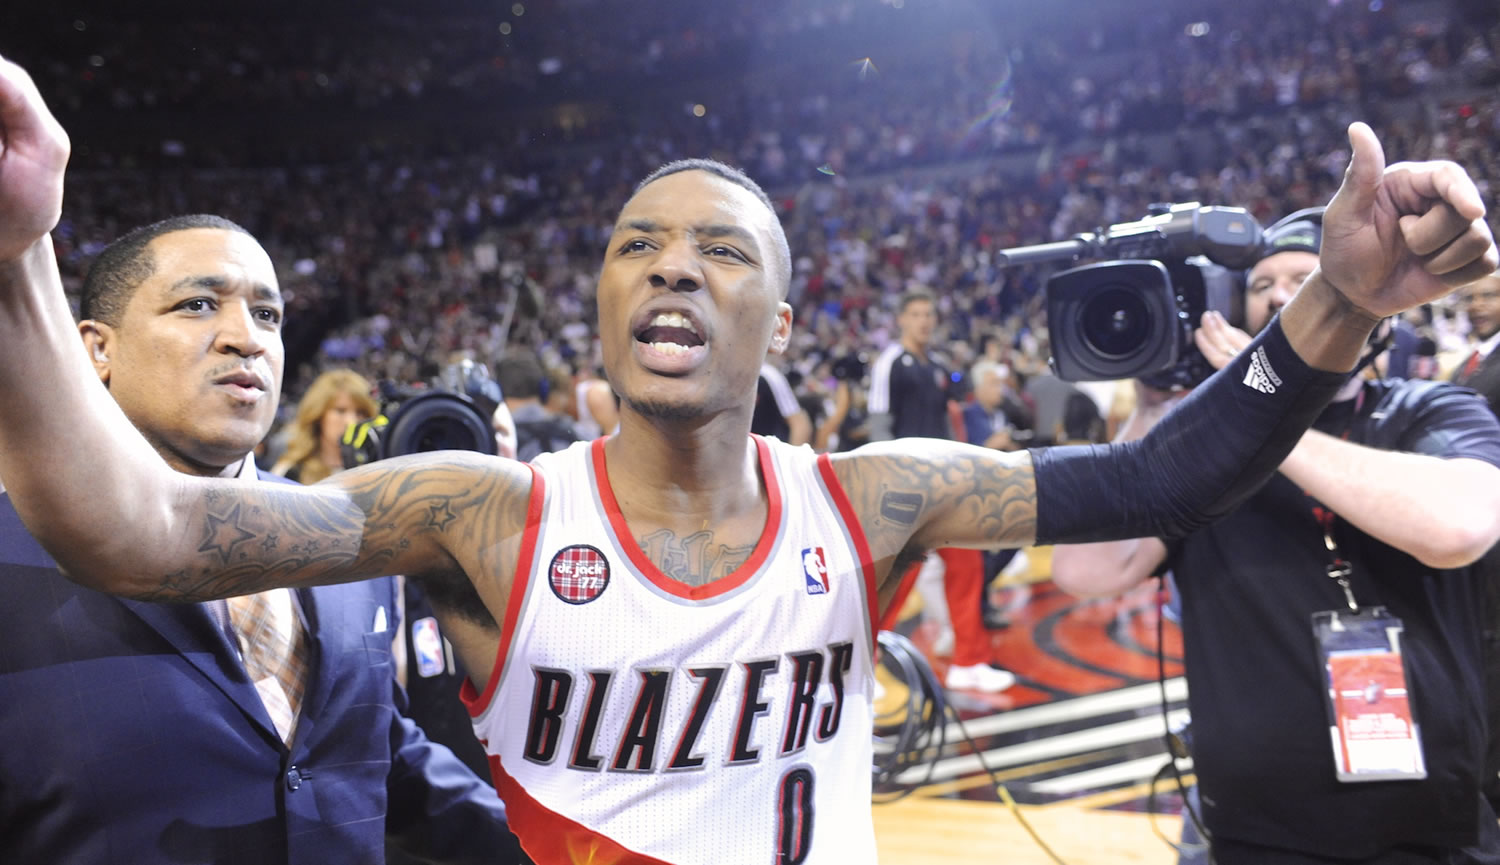 Portland Trail Blazers' Damian Lillard, center, celebrates with fans, his winning shot against the Houston Rockets during the last .9 of a second of game six of an NBA basketball first-round playoff series game in Portland, Ore., Friday May 2, 2014. The Trail Blazers won the series in a 99-98 win.